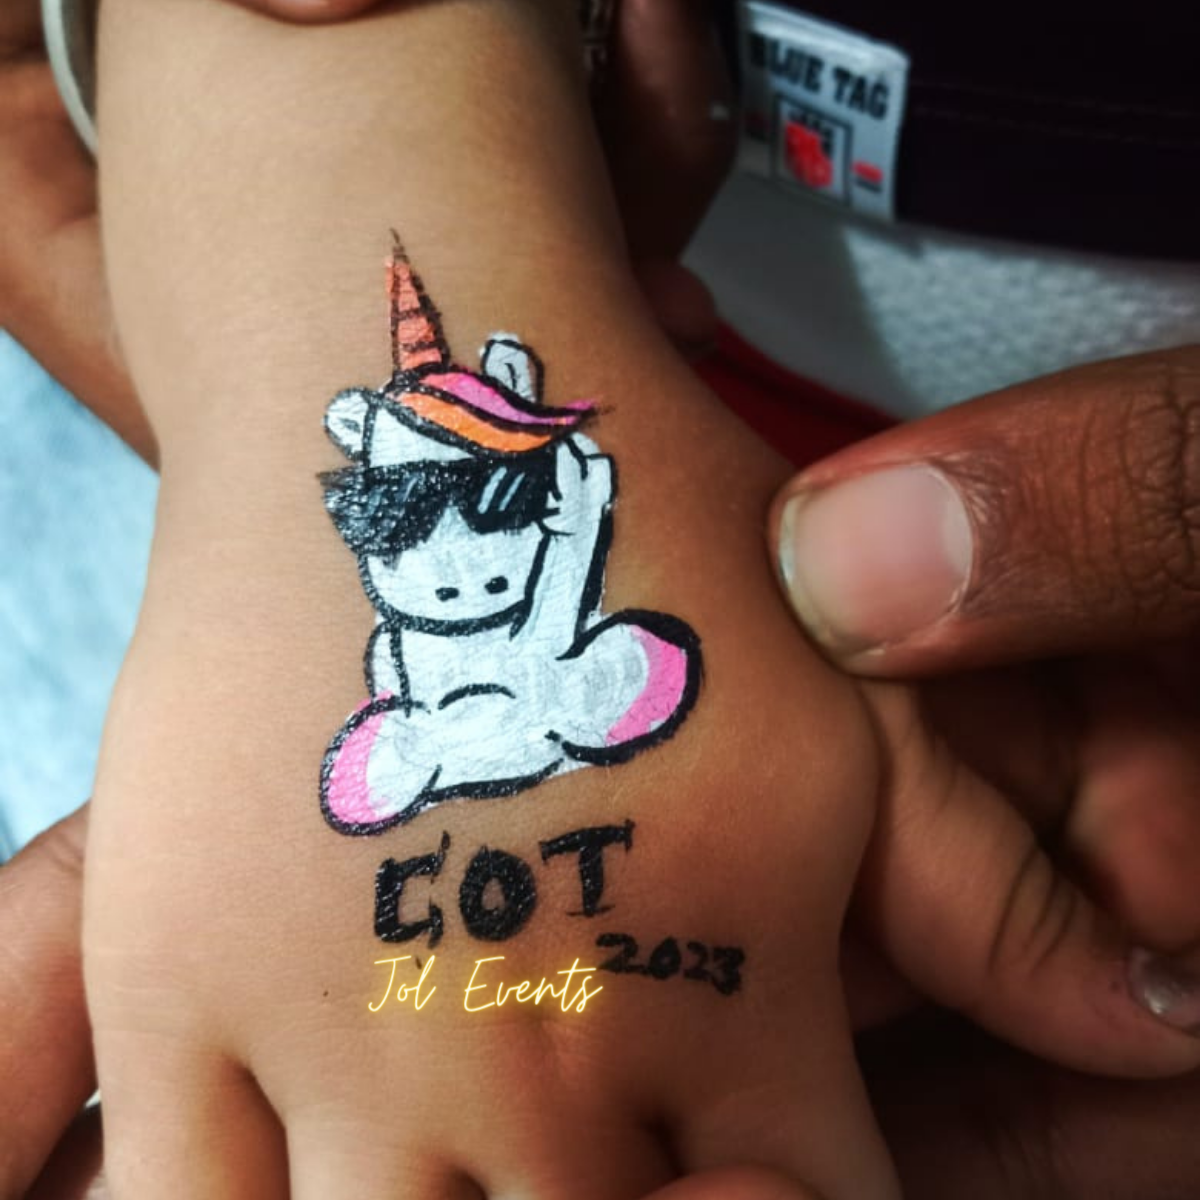 Birthday Party Tattoo Artist  Temporary kids tattoo for birthday party   Facebook